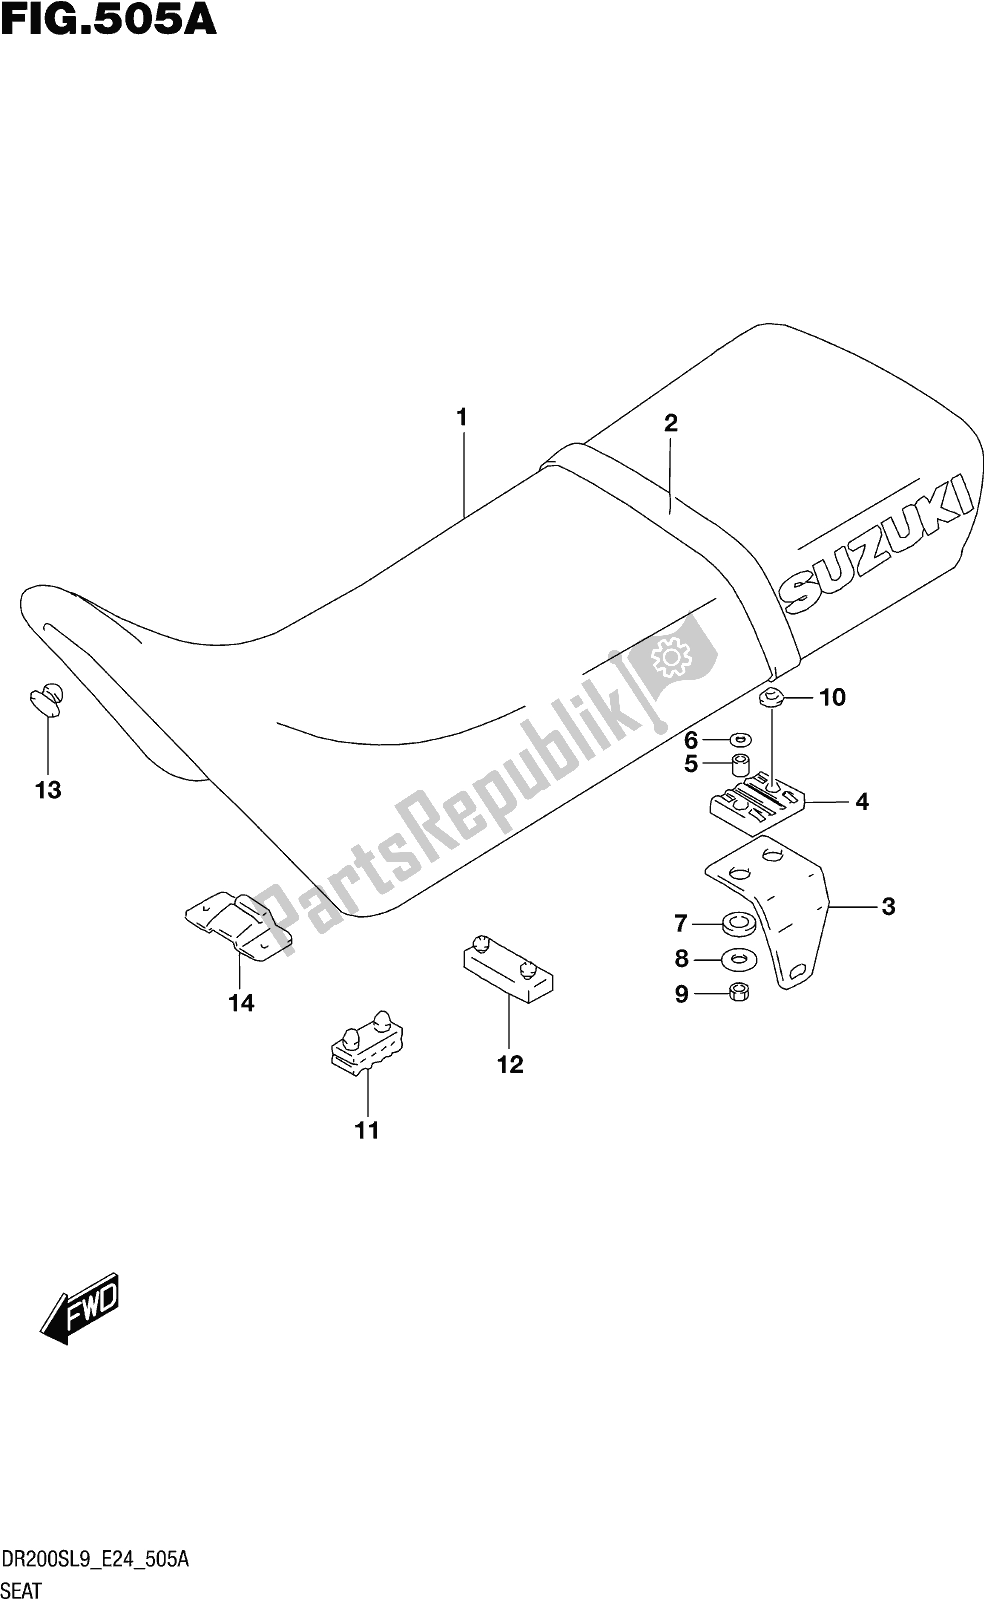 All parts for the Fig. 505a Seat of the Suzuki DR 200S 2019